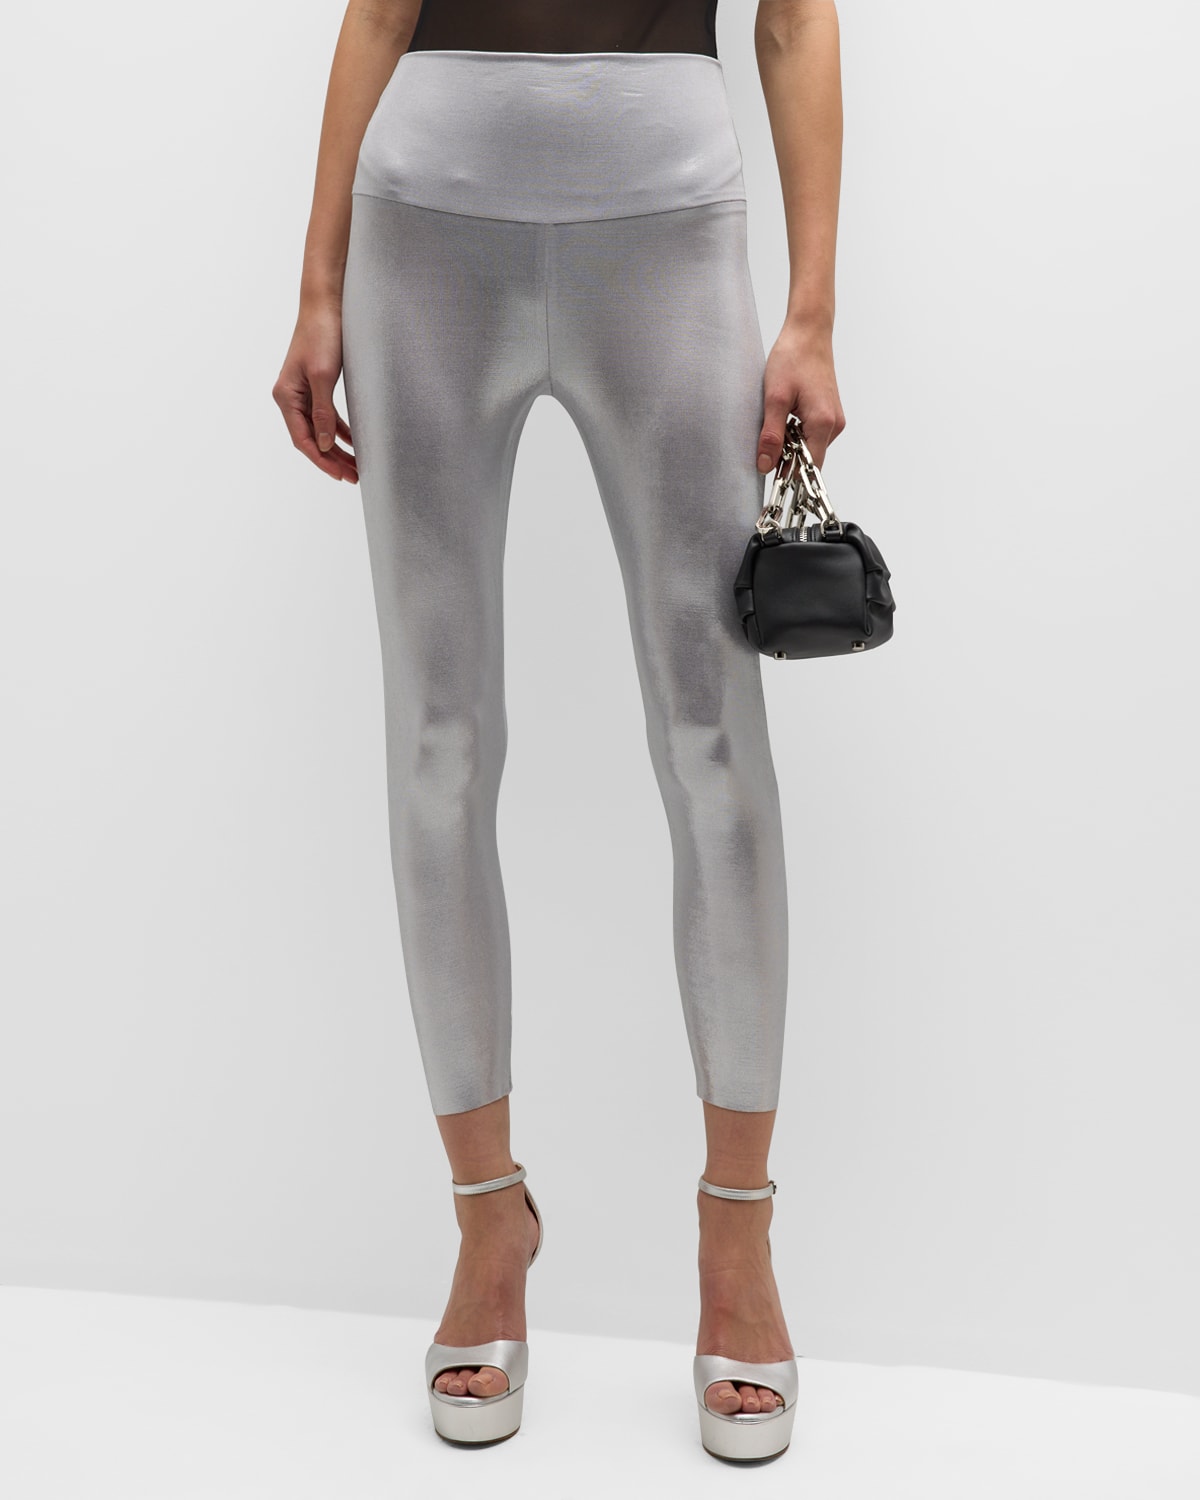 Skims Barely There Cropped Leggings